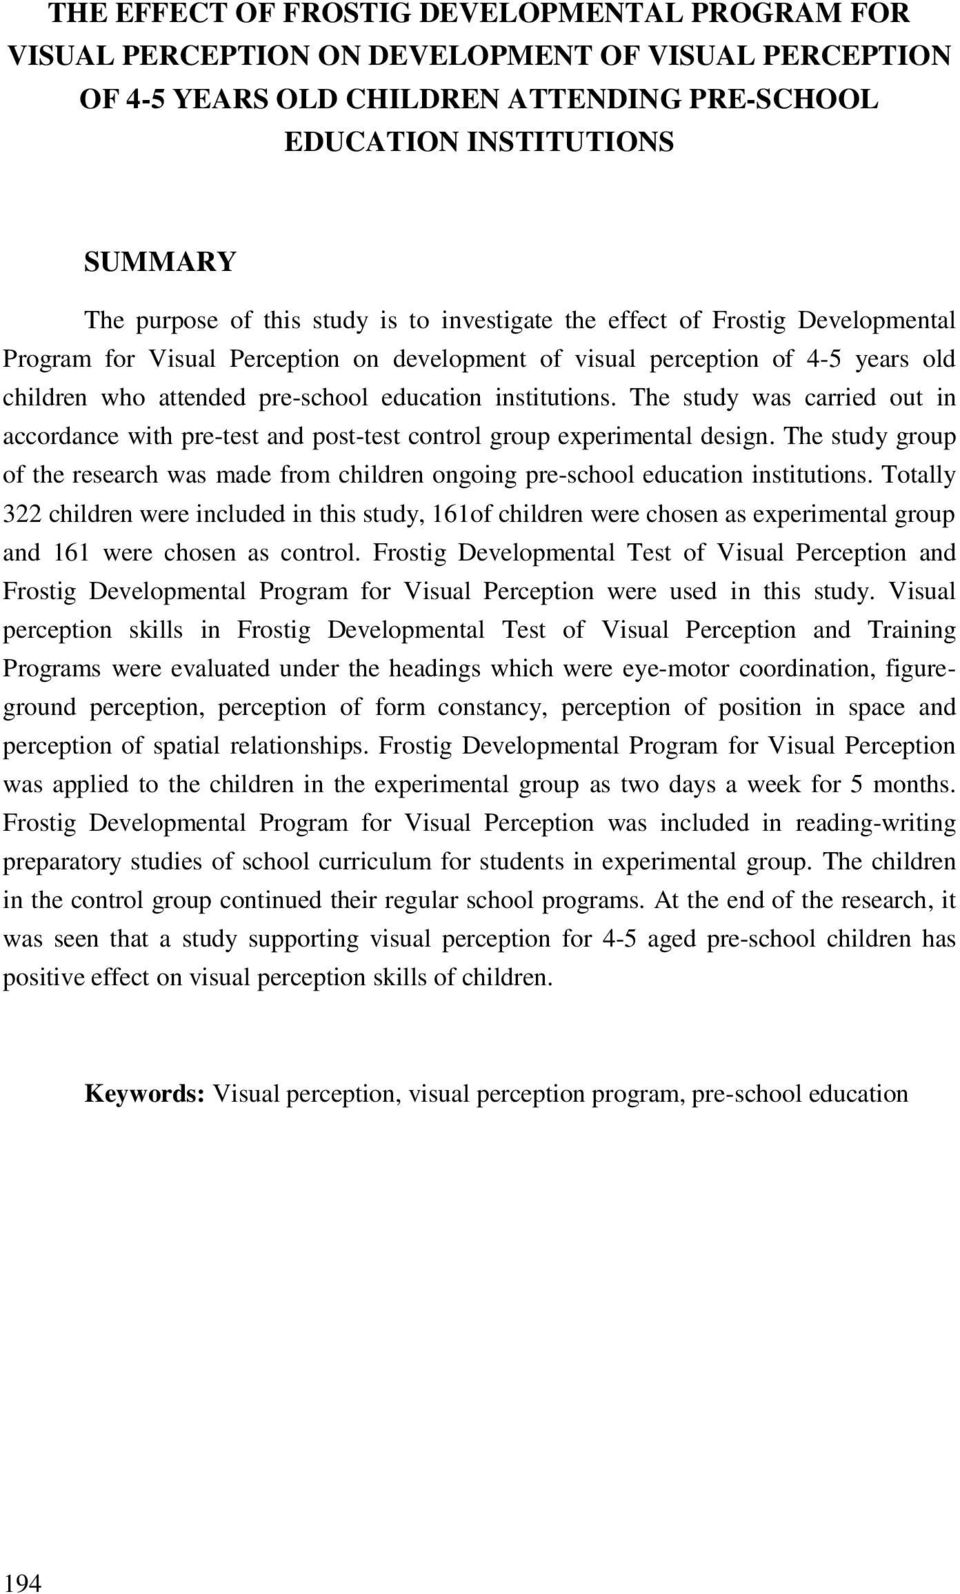 The study was carried out in accordance with pre-test and post-test control group experimental design. The study group of the research was made from children ongoing pre-school education institutions.